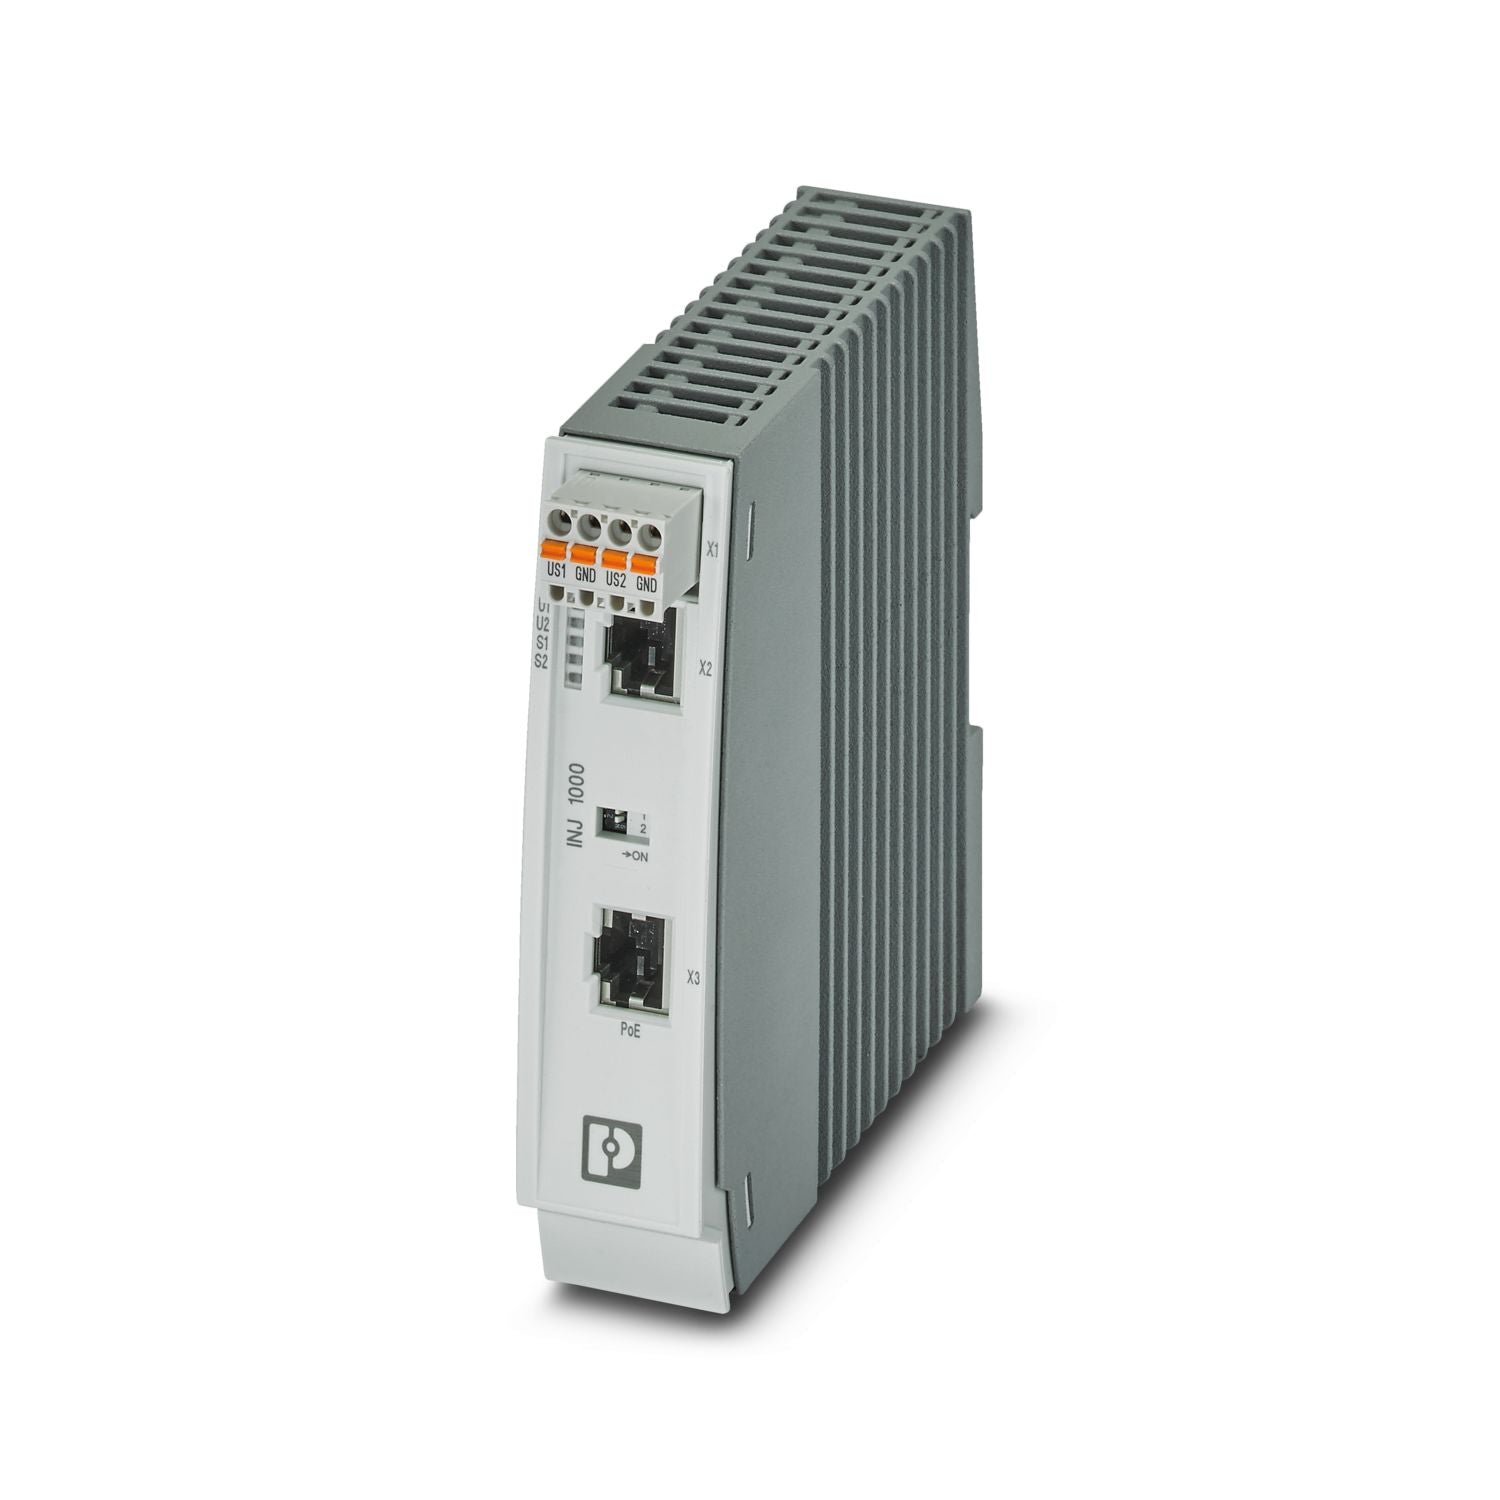 2703008 | Phoenix Contact | PoE injector 60 W two RJ45 sockets 10/100/1000 Mbps DIN rail mounting IP20